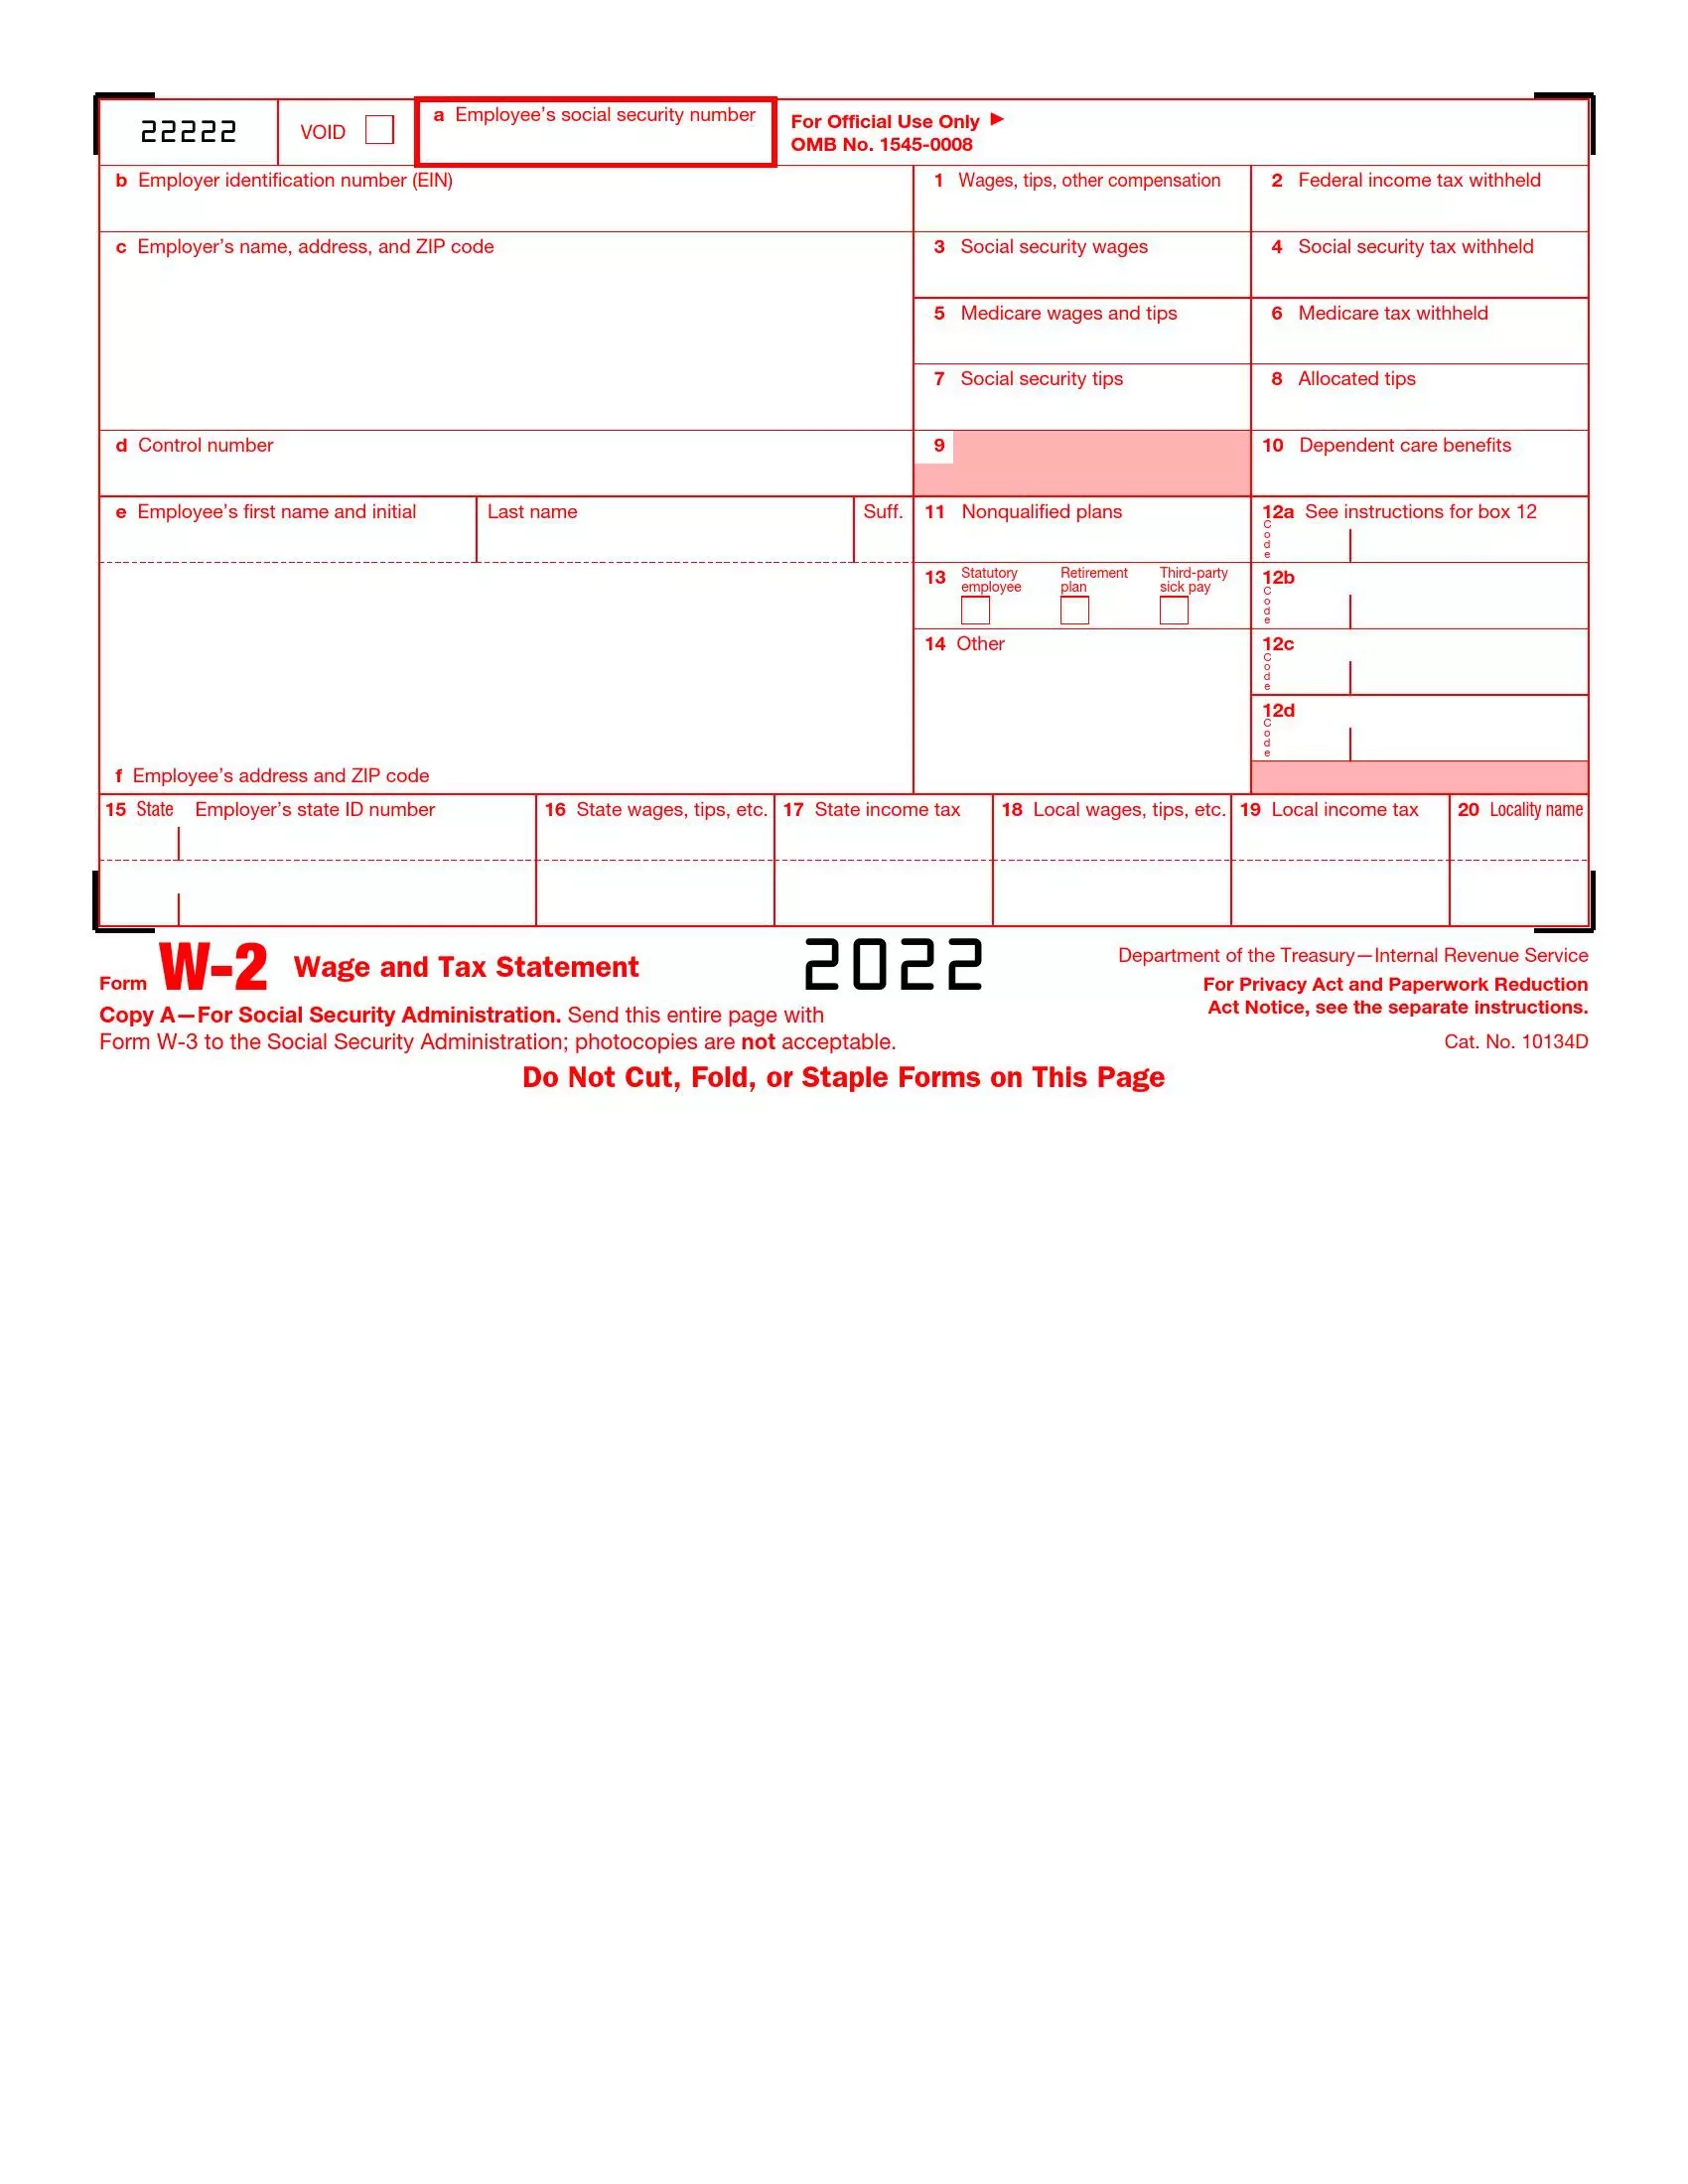 Irs Form W-2 ≡ Fill Out Printable Pdf Forms Online within Irs W2 Form Download